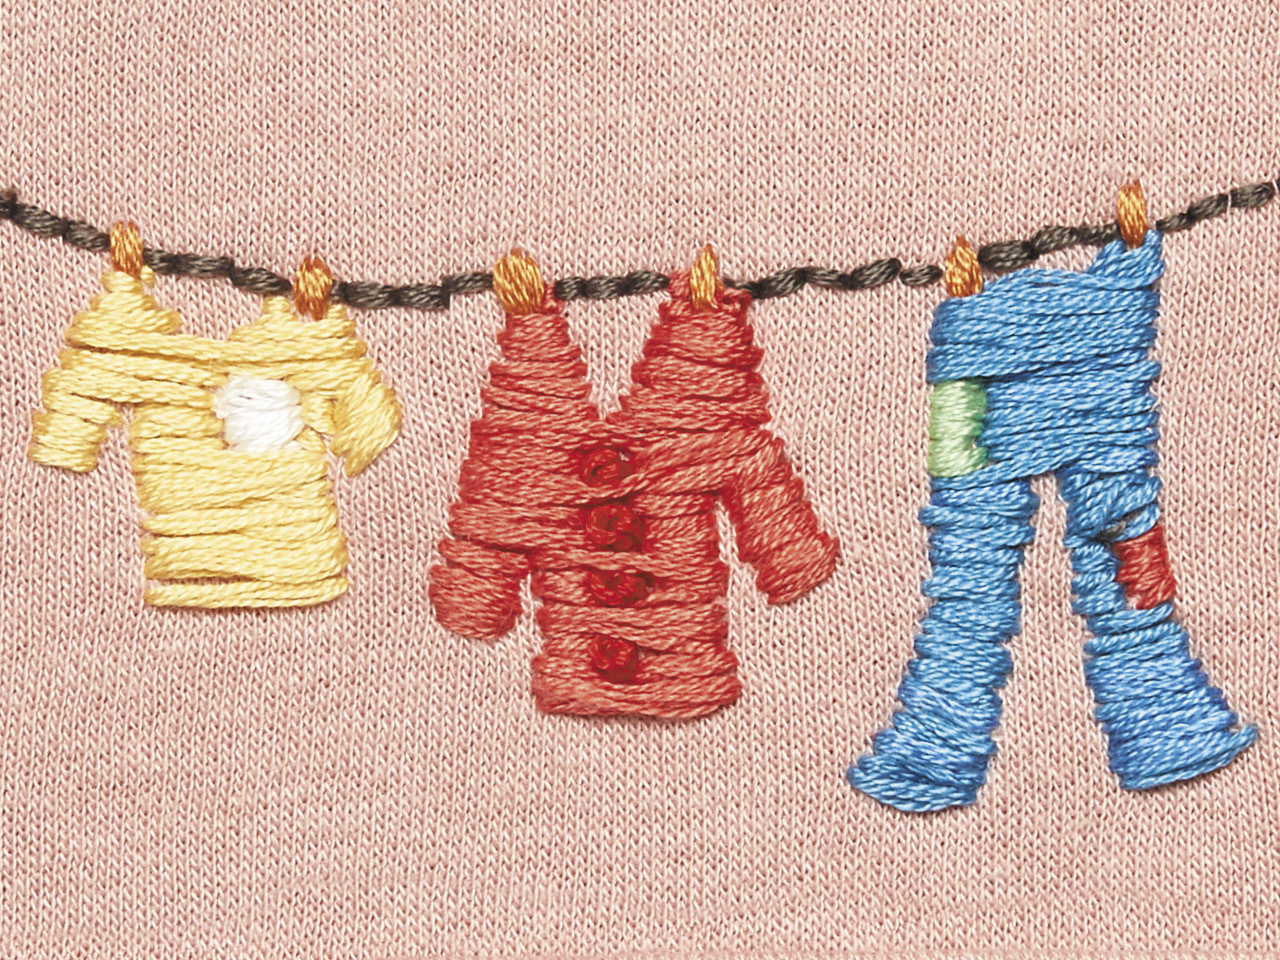 An embroidered illustration of three items of clothing hanging on a clothesline